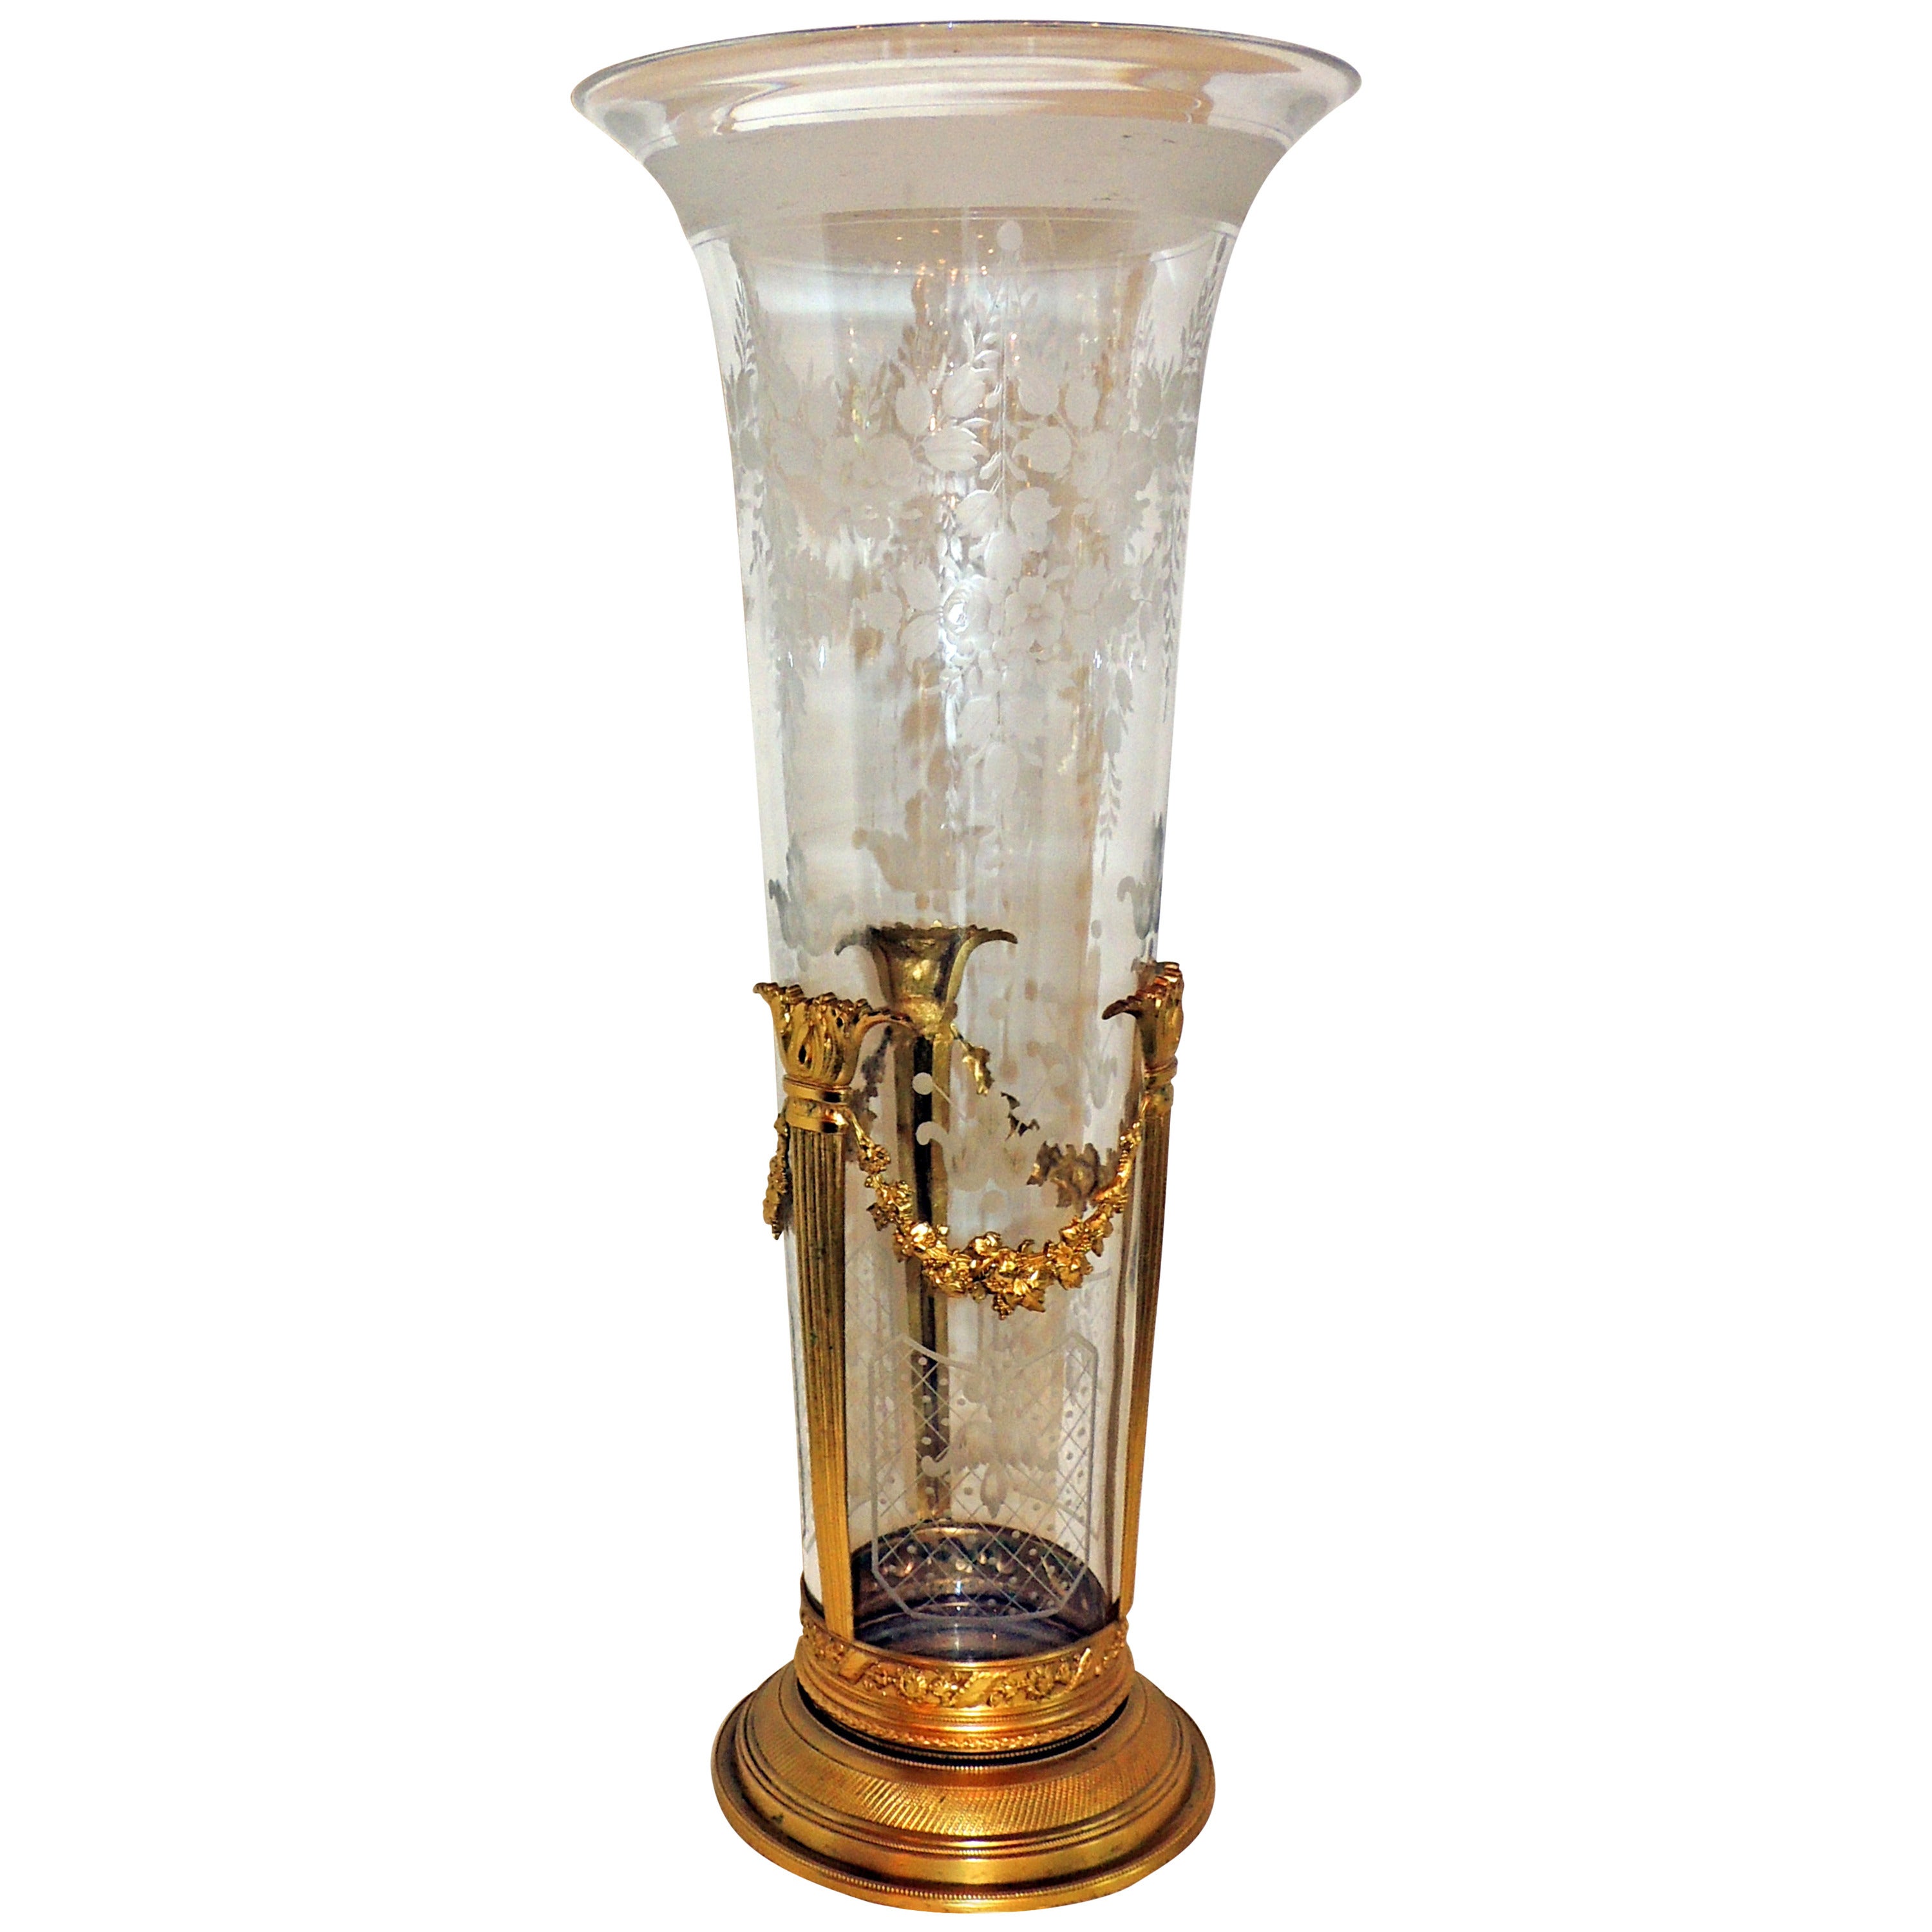 Wonderful French Dore Bronze Ormolu Mounted and Etched Crystal Vase Centerpiece